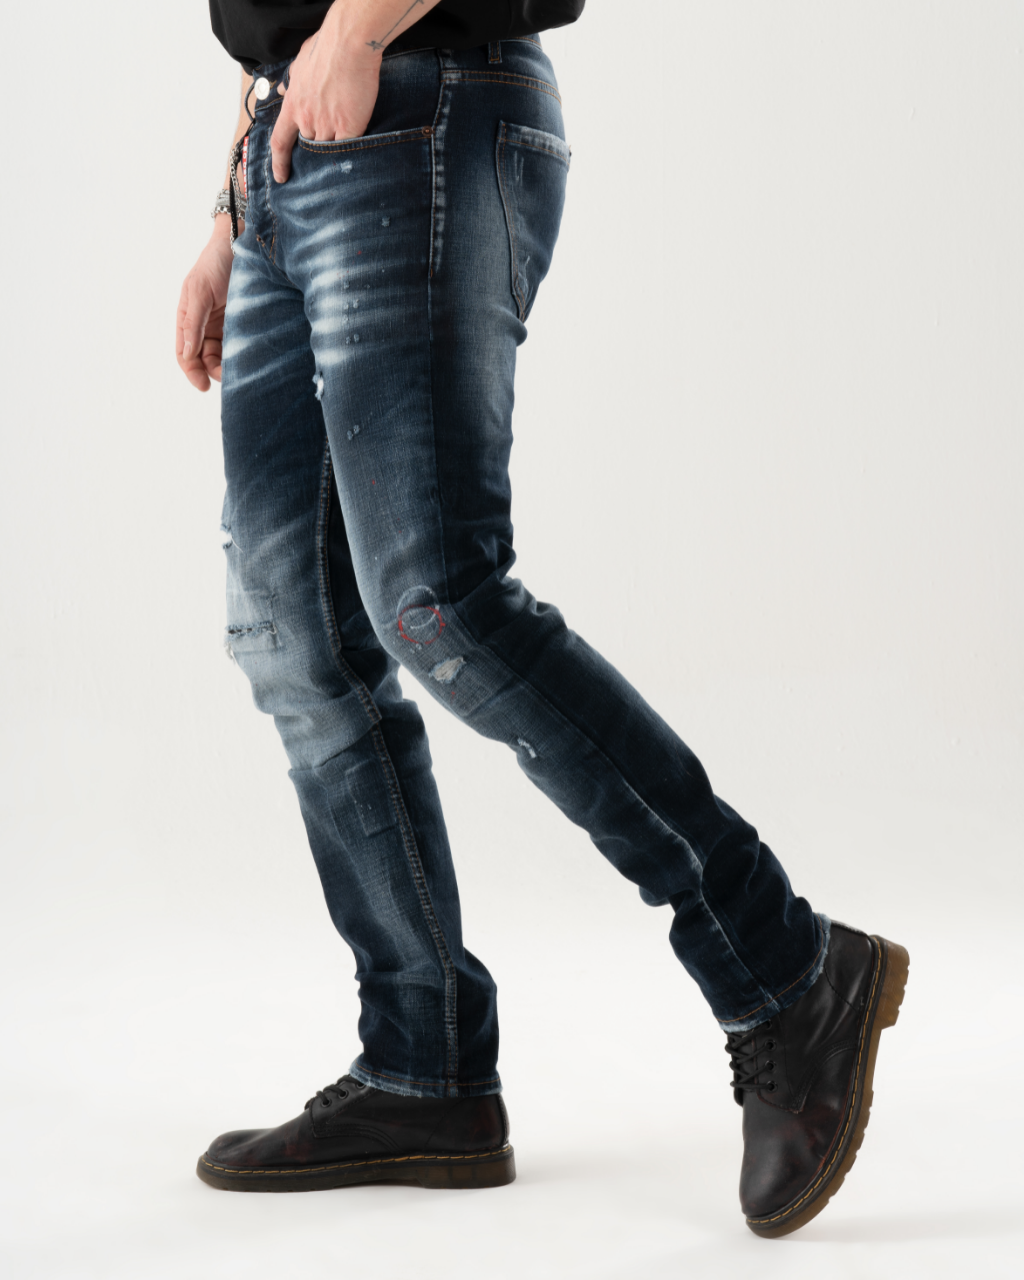 A man is standing in a studio wearing a pair of LIGHTNING skinny fit jeans.